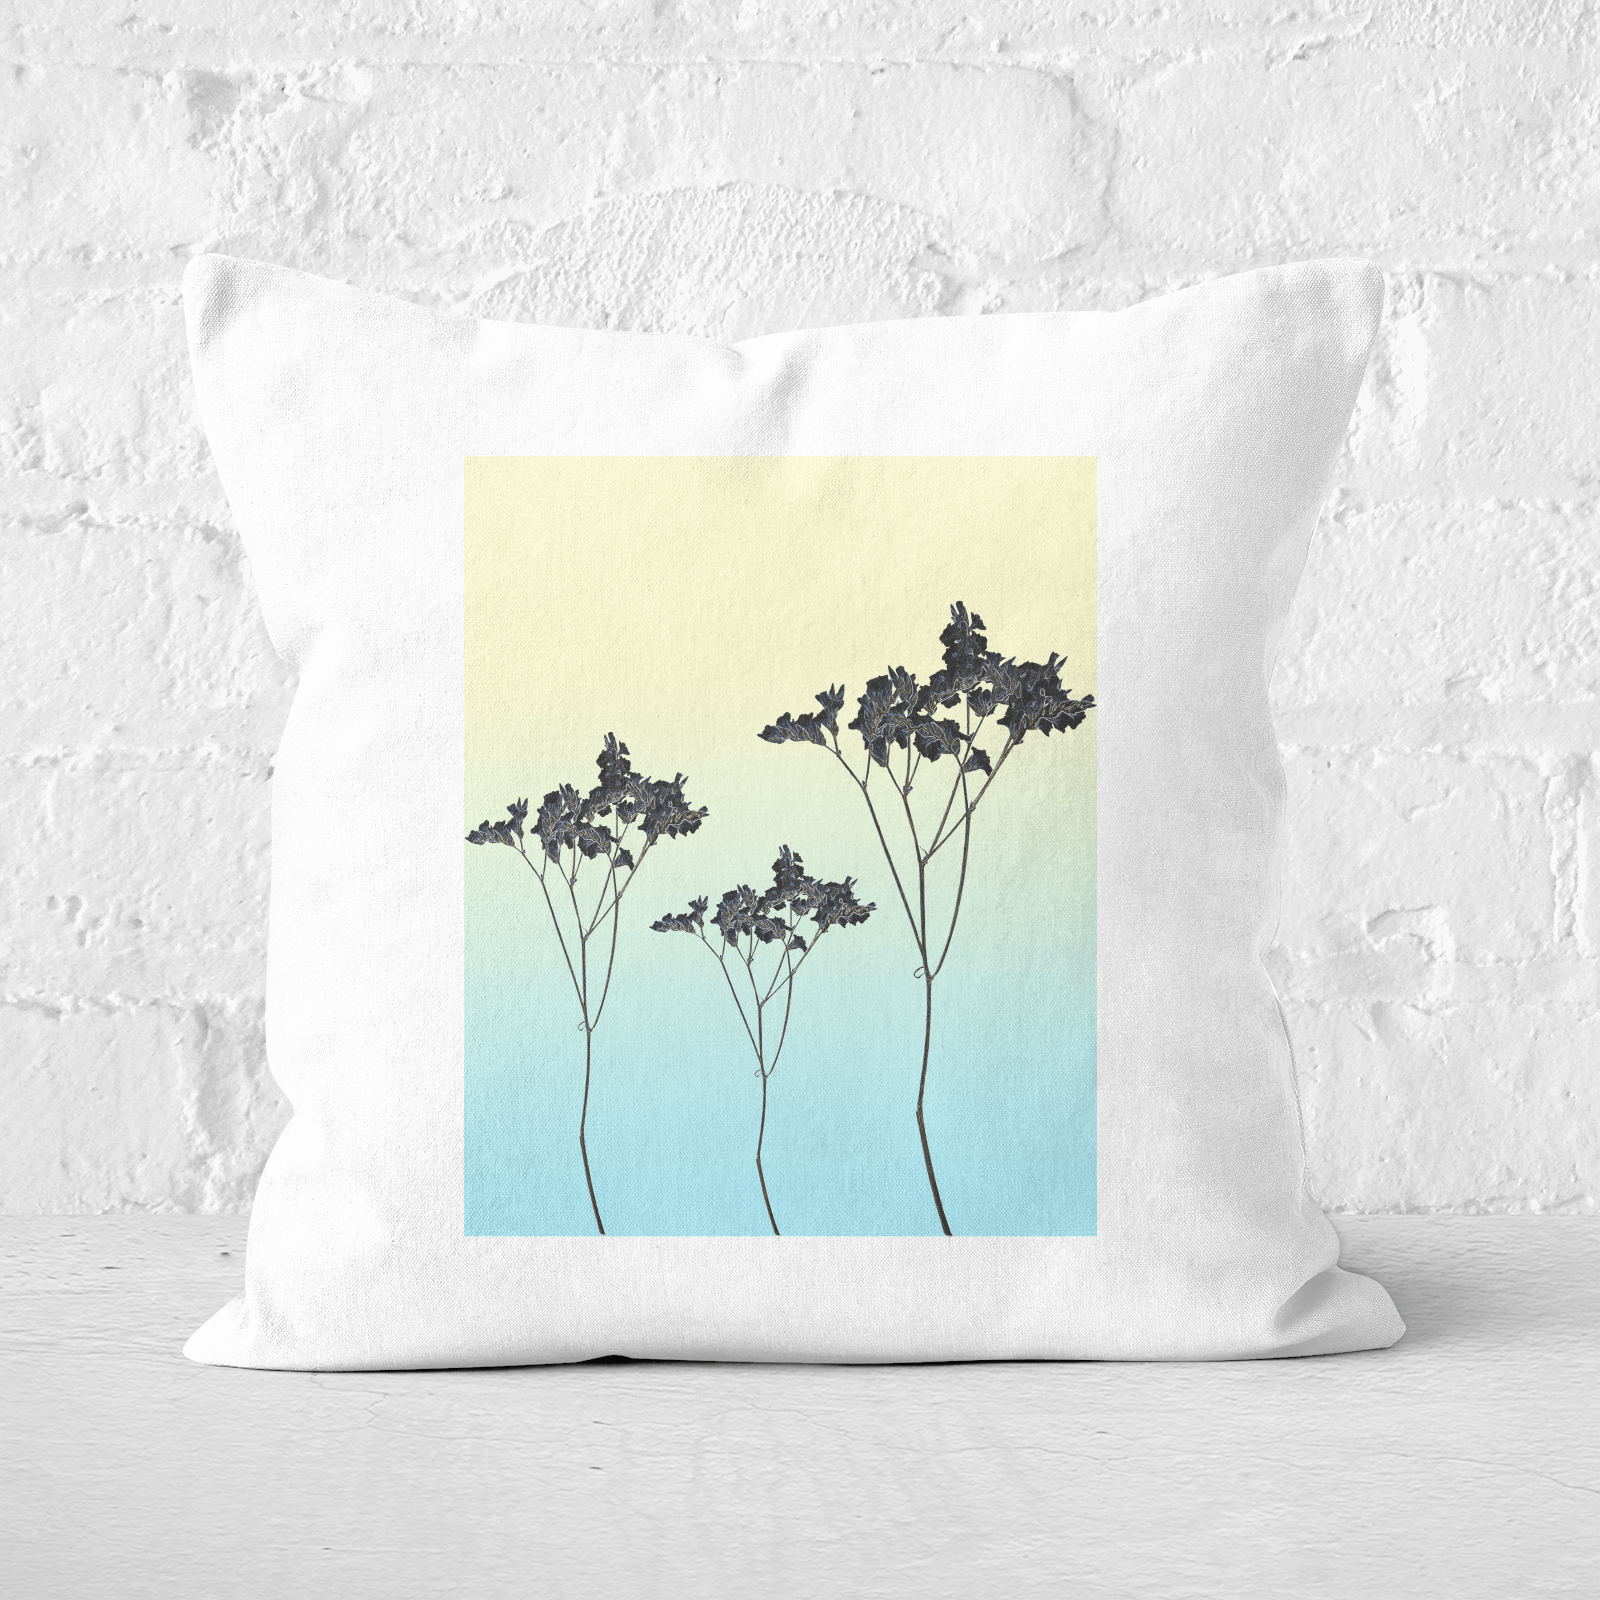 Pressed Flowers Mellow Tones Ombre Flowers Square Cushion - 60x60cm - Soft Touch